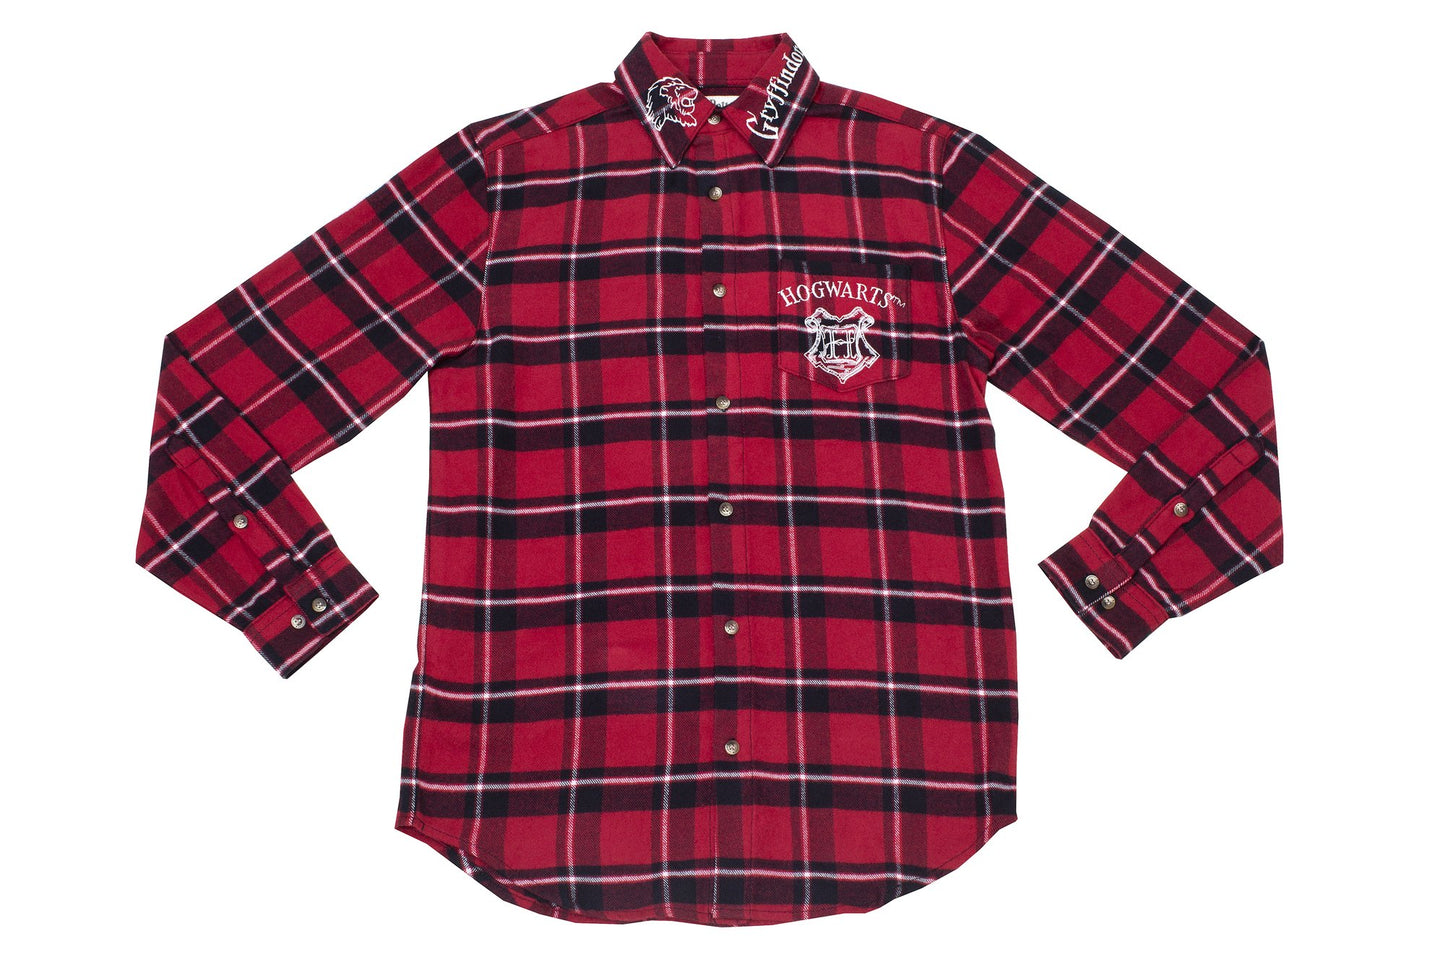 Gryffindor House Crest (Harry Potter) Flannel Shirt by Cakeworthy